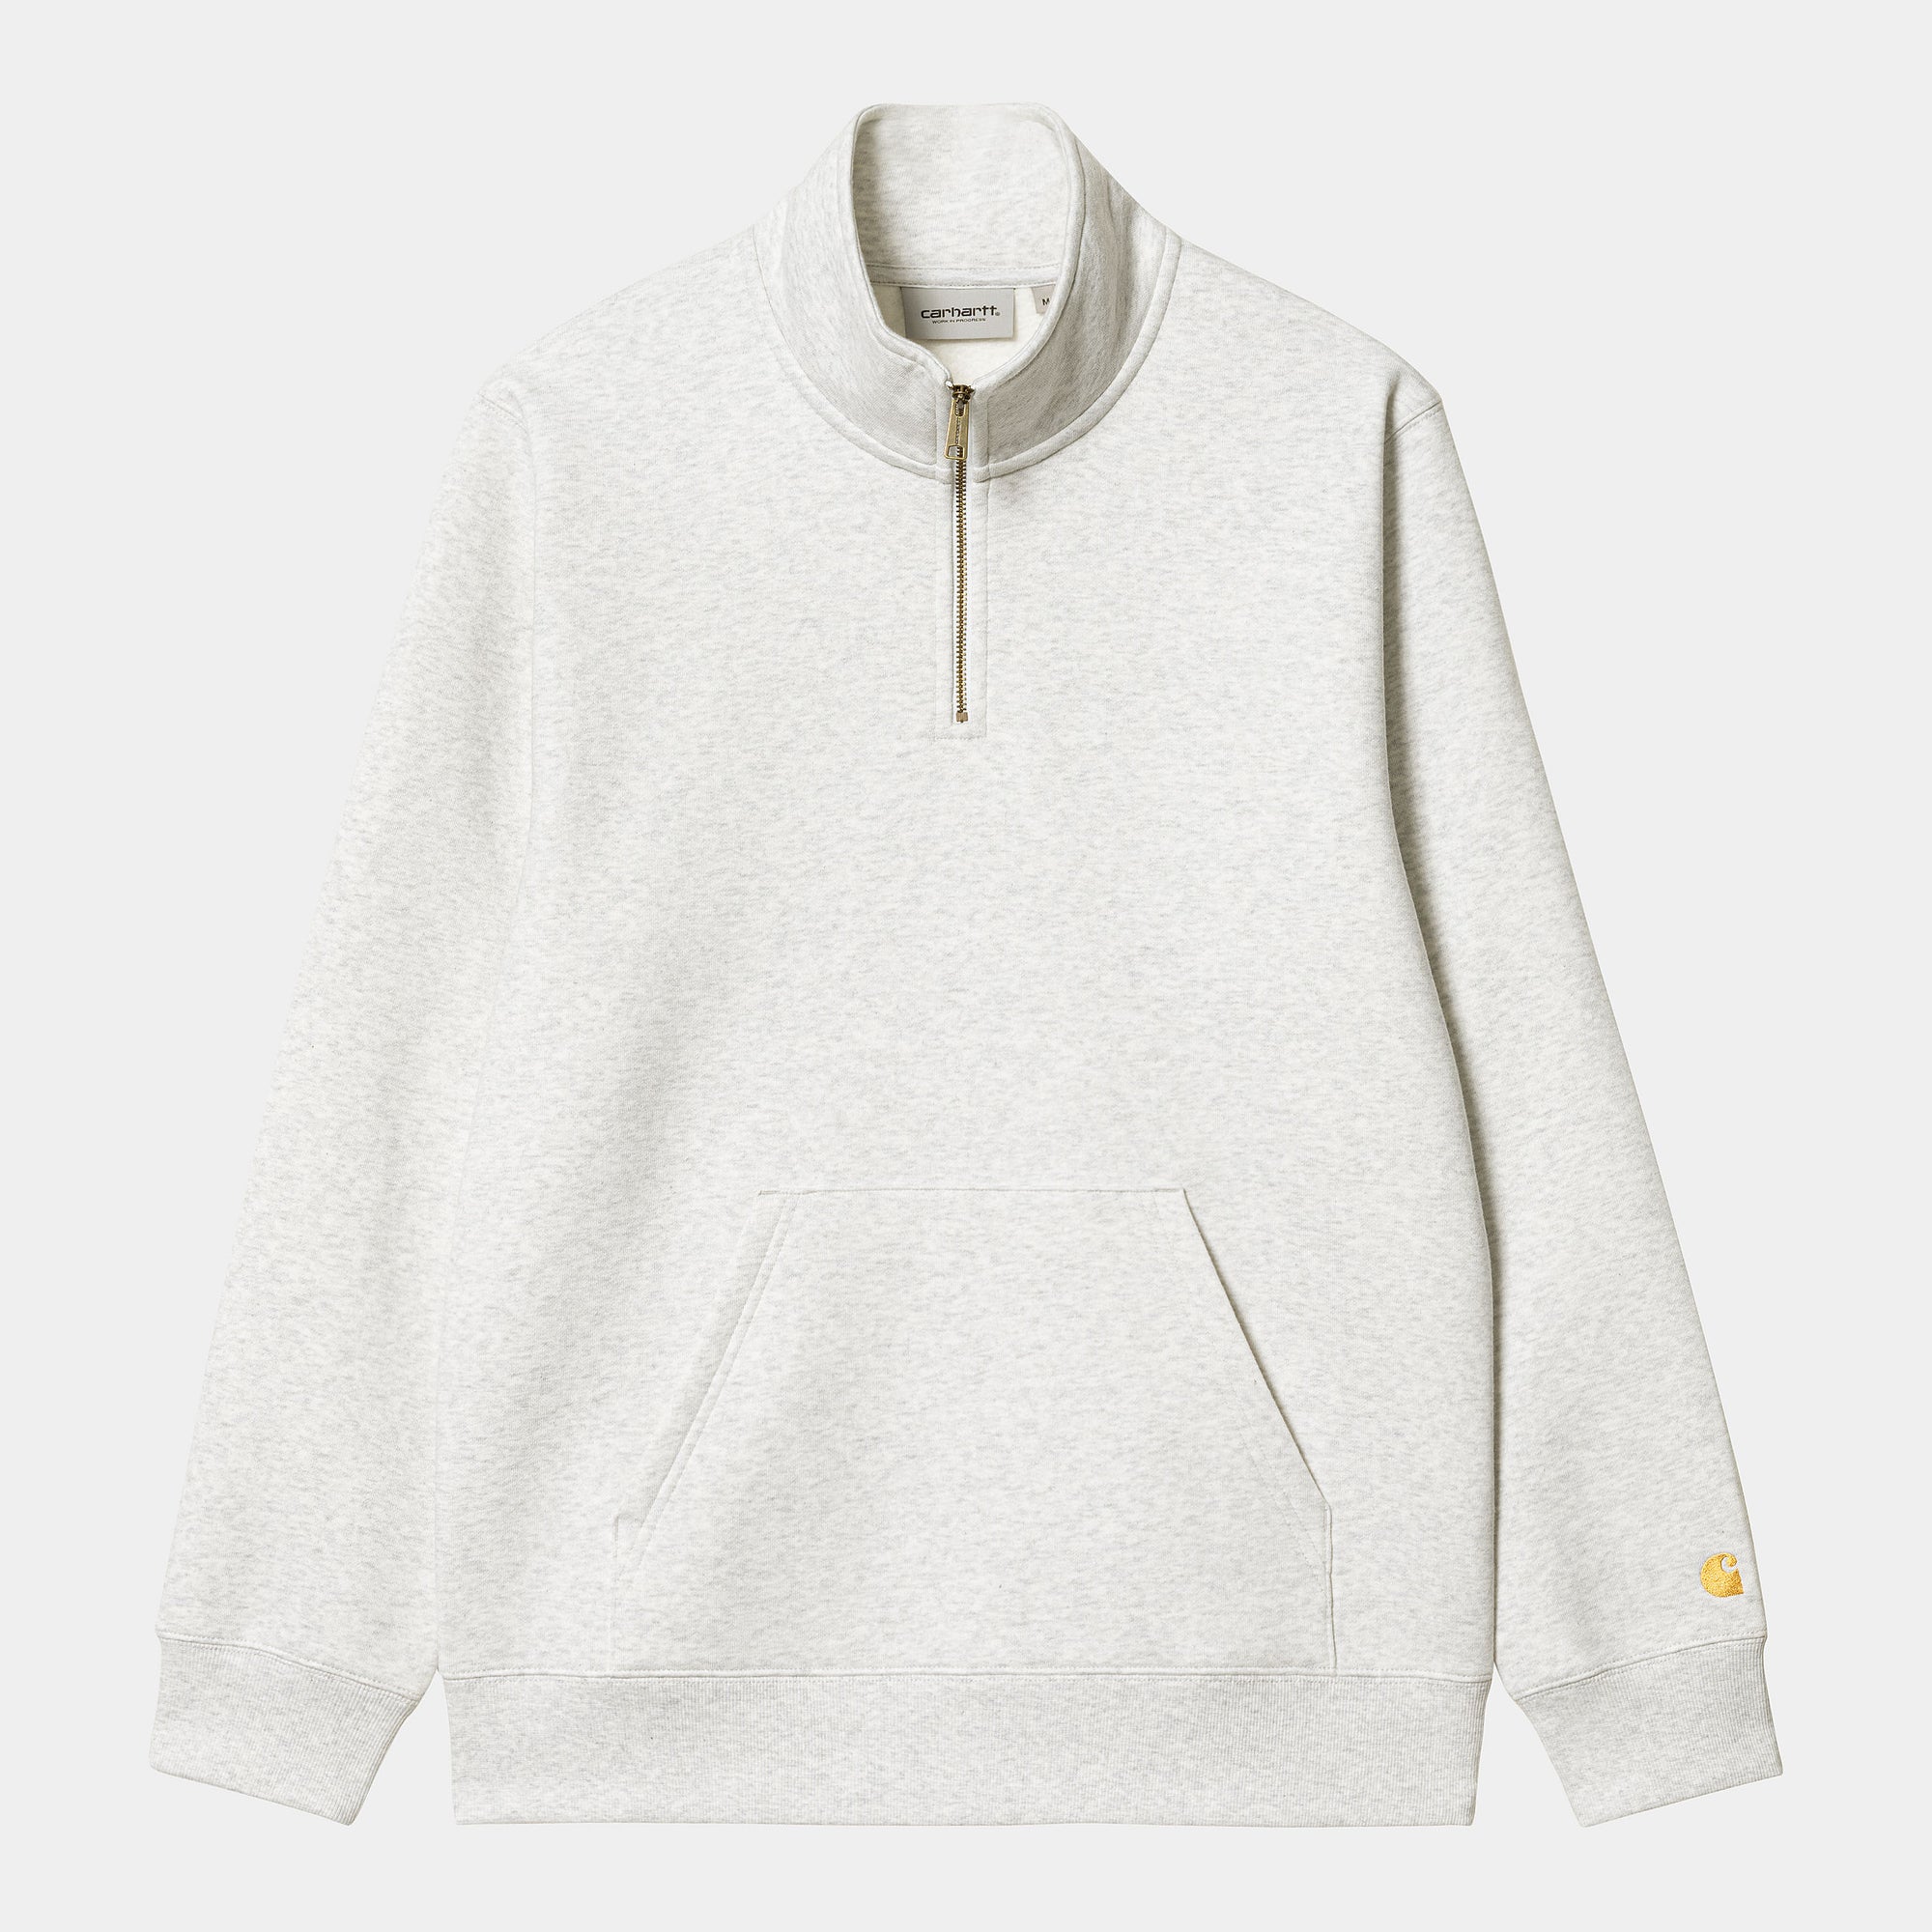 Carhartt WIP Chase Zip Neck - Ash Heather / Gold